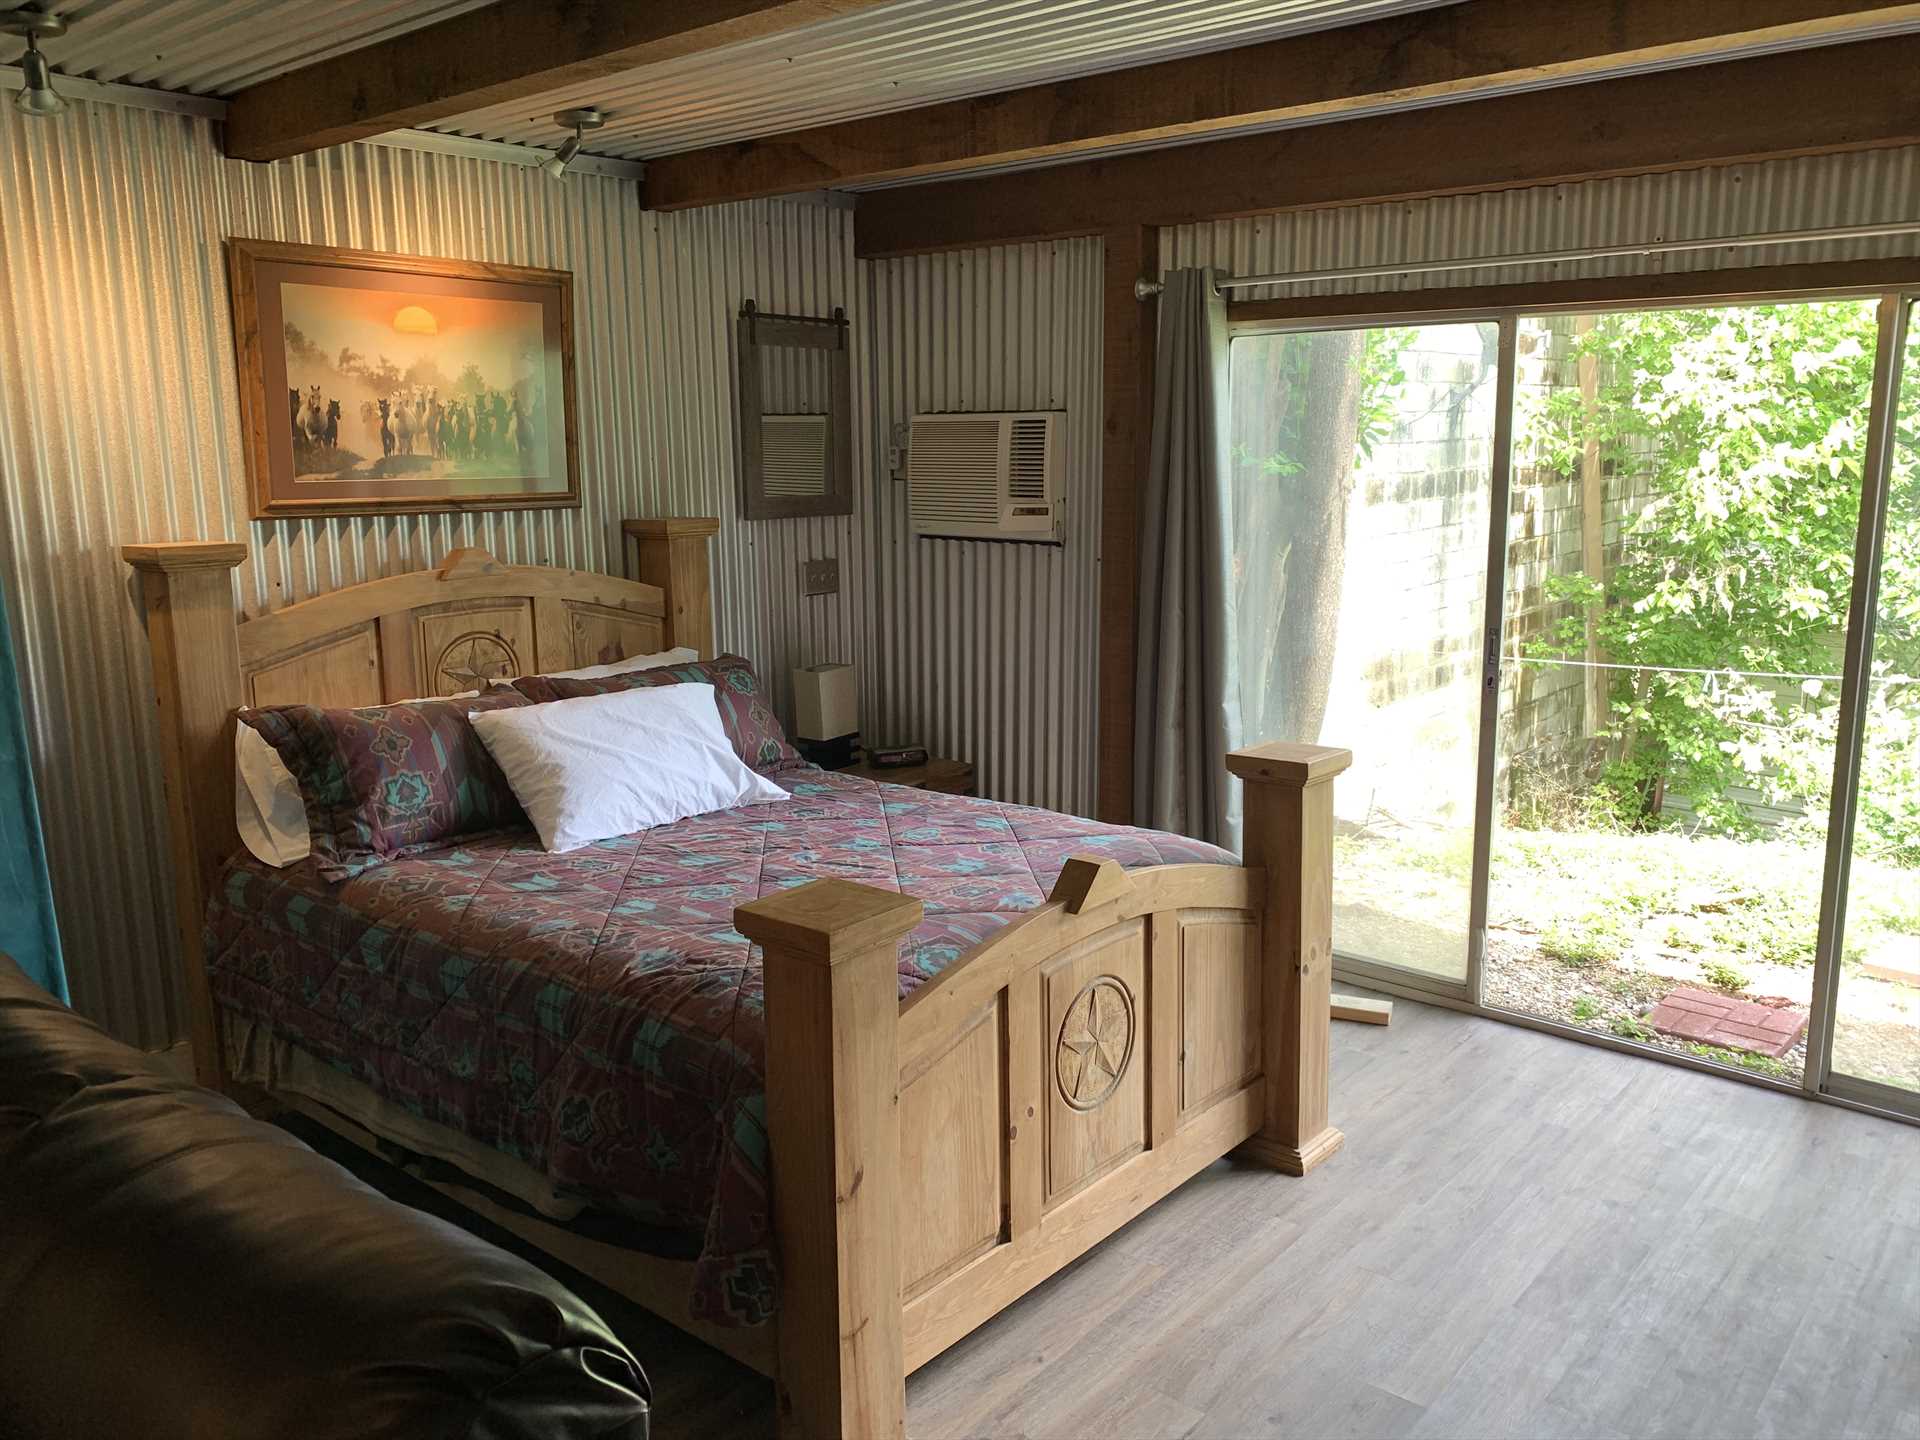                                                 Dream of further Hill Country adventures on the comfy queen-sized bed! Clean linens are provided, and two more guests can rest on the full futon in the living area.